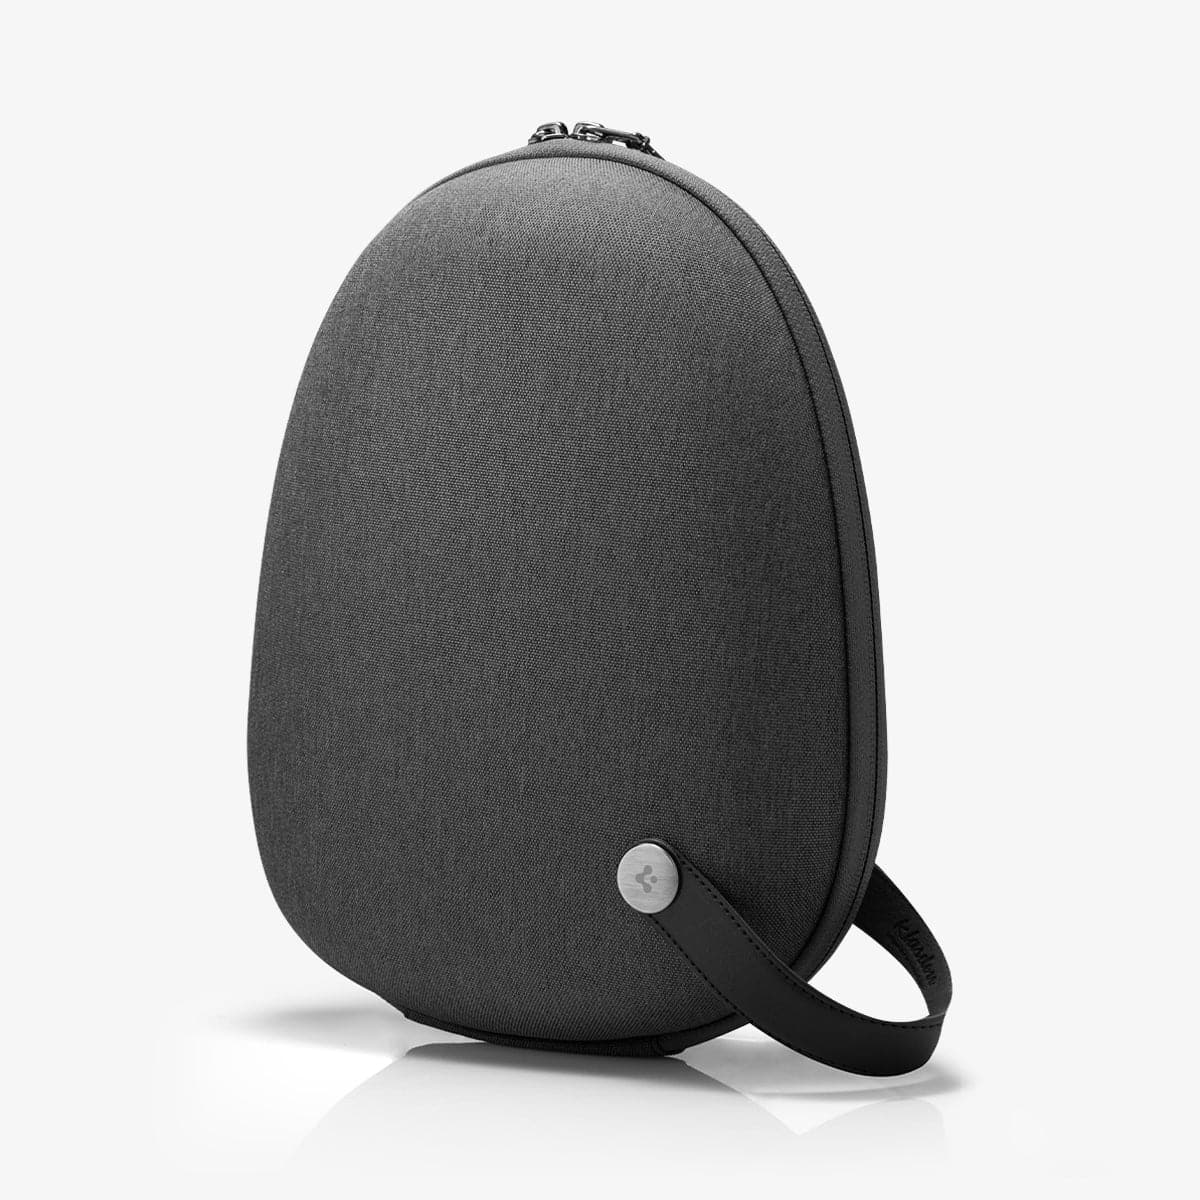 AFA02996 - Airpods Max Klasden Pouch in charcoal gray showing the front and partial side